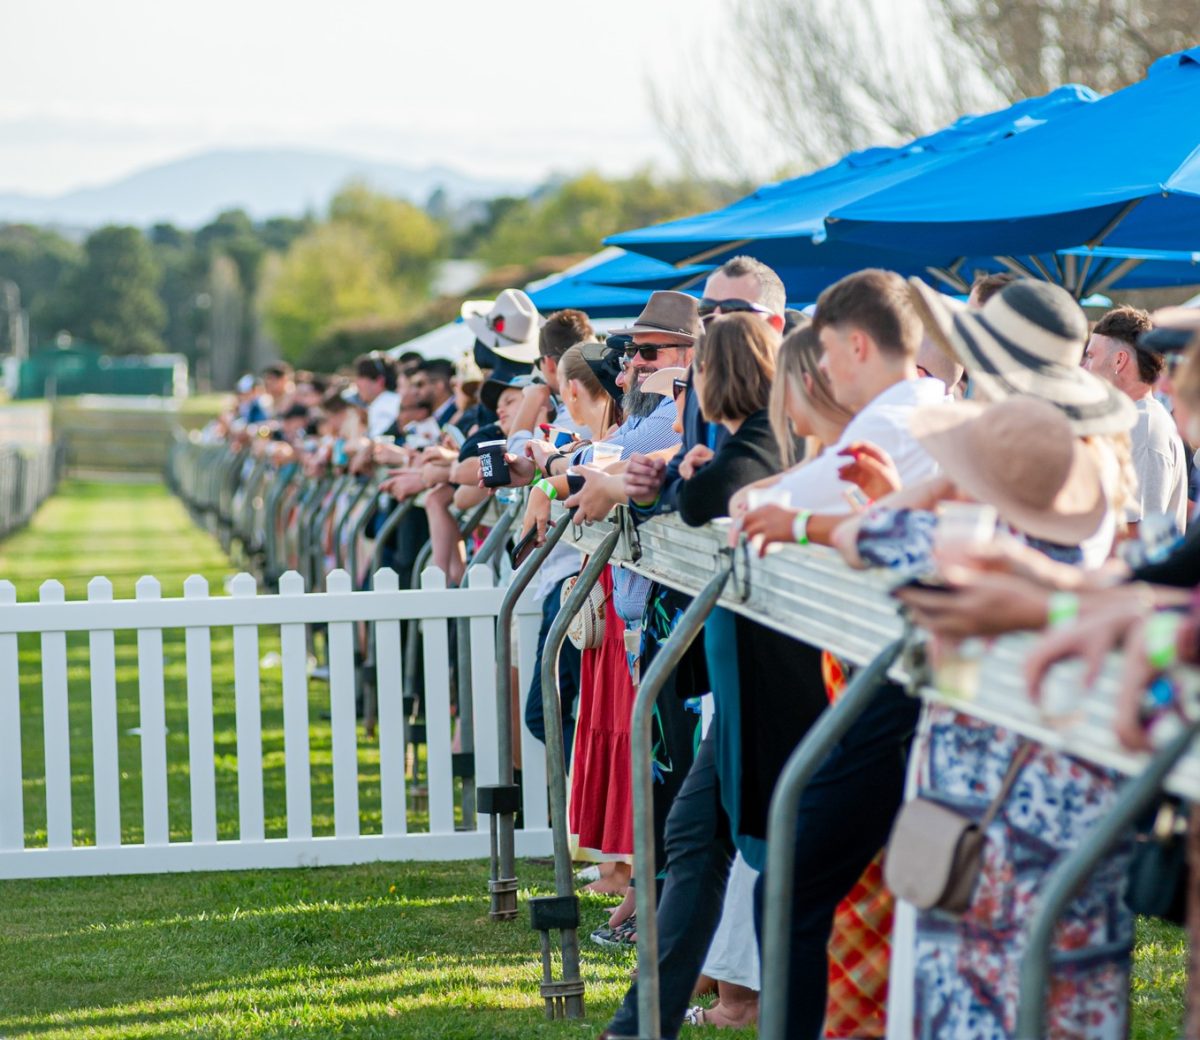 People dressed up for race day at Thoroughbred Park. Photo: Thoroughbred Park.